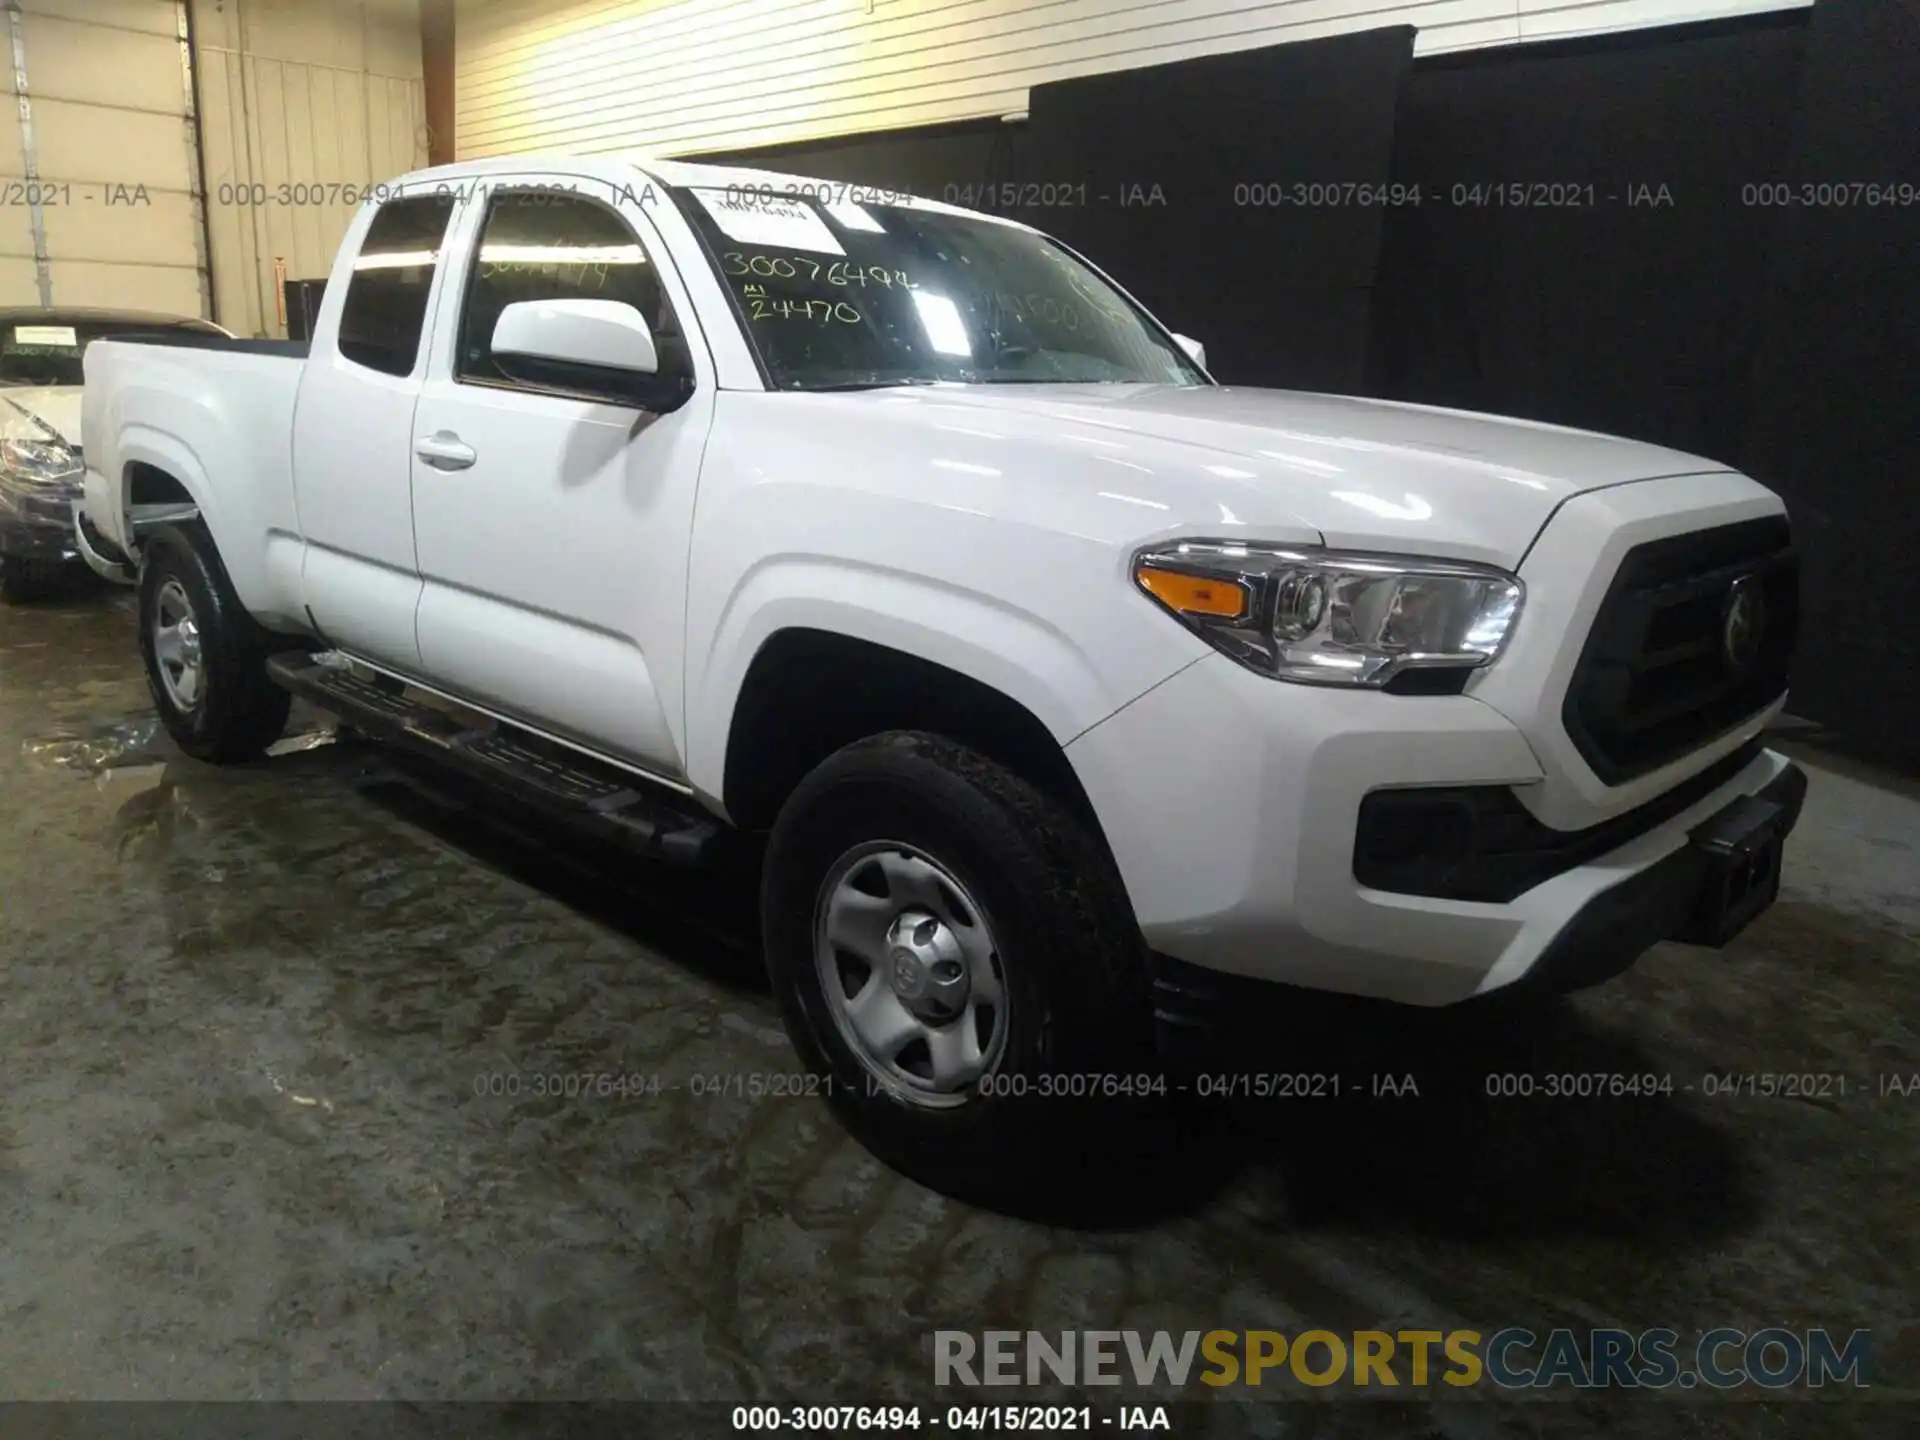 1 Photograph of a damaged car 5TFRX5GN1LX181333 TOYOTA TACOMA 2WD 2020